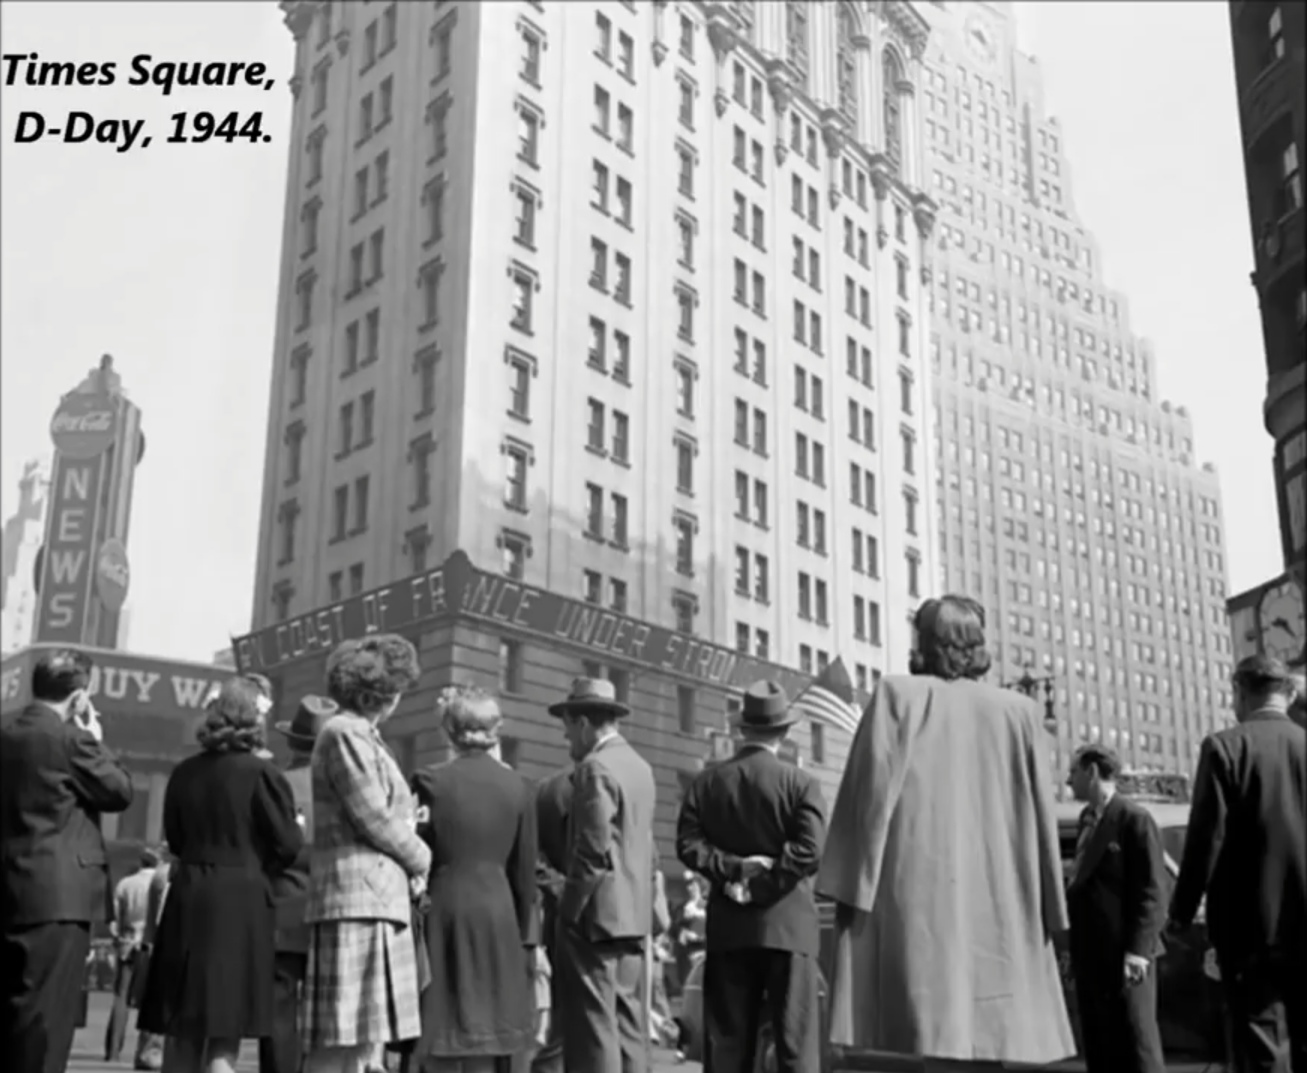 d day times square - Times Square, DDay, 1944. Is Setiast Juy Wa